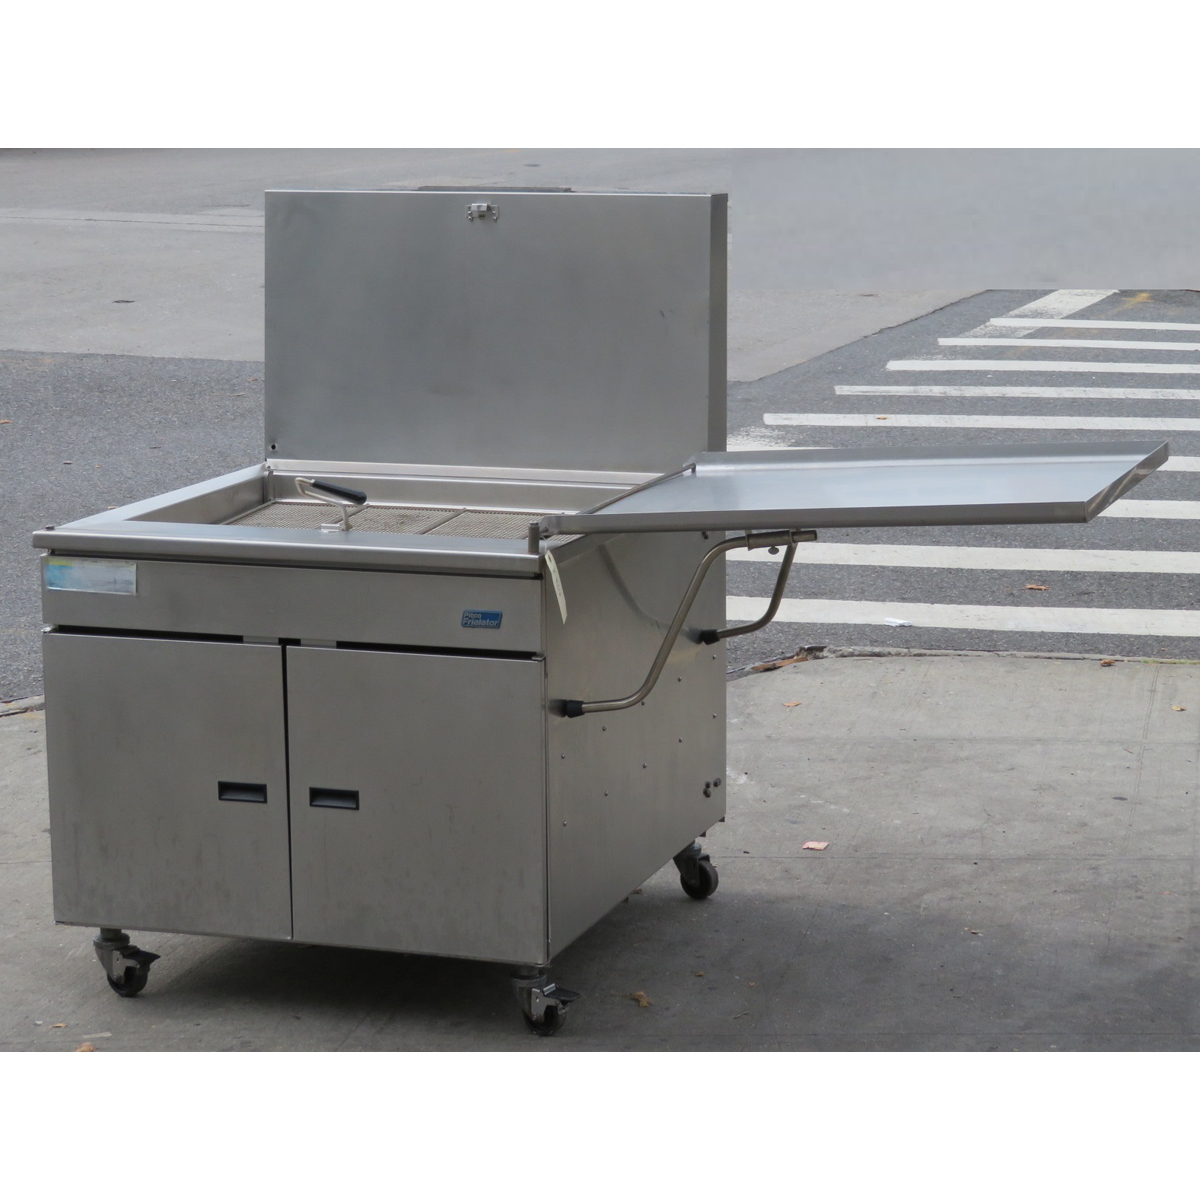 Pitco 34PS Natrual Gas Fryer, Used Very Good Condition